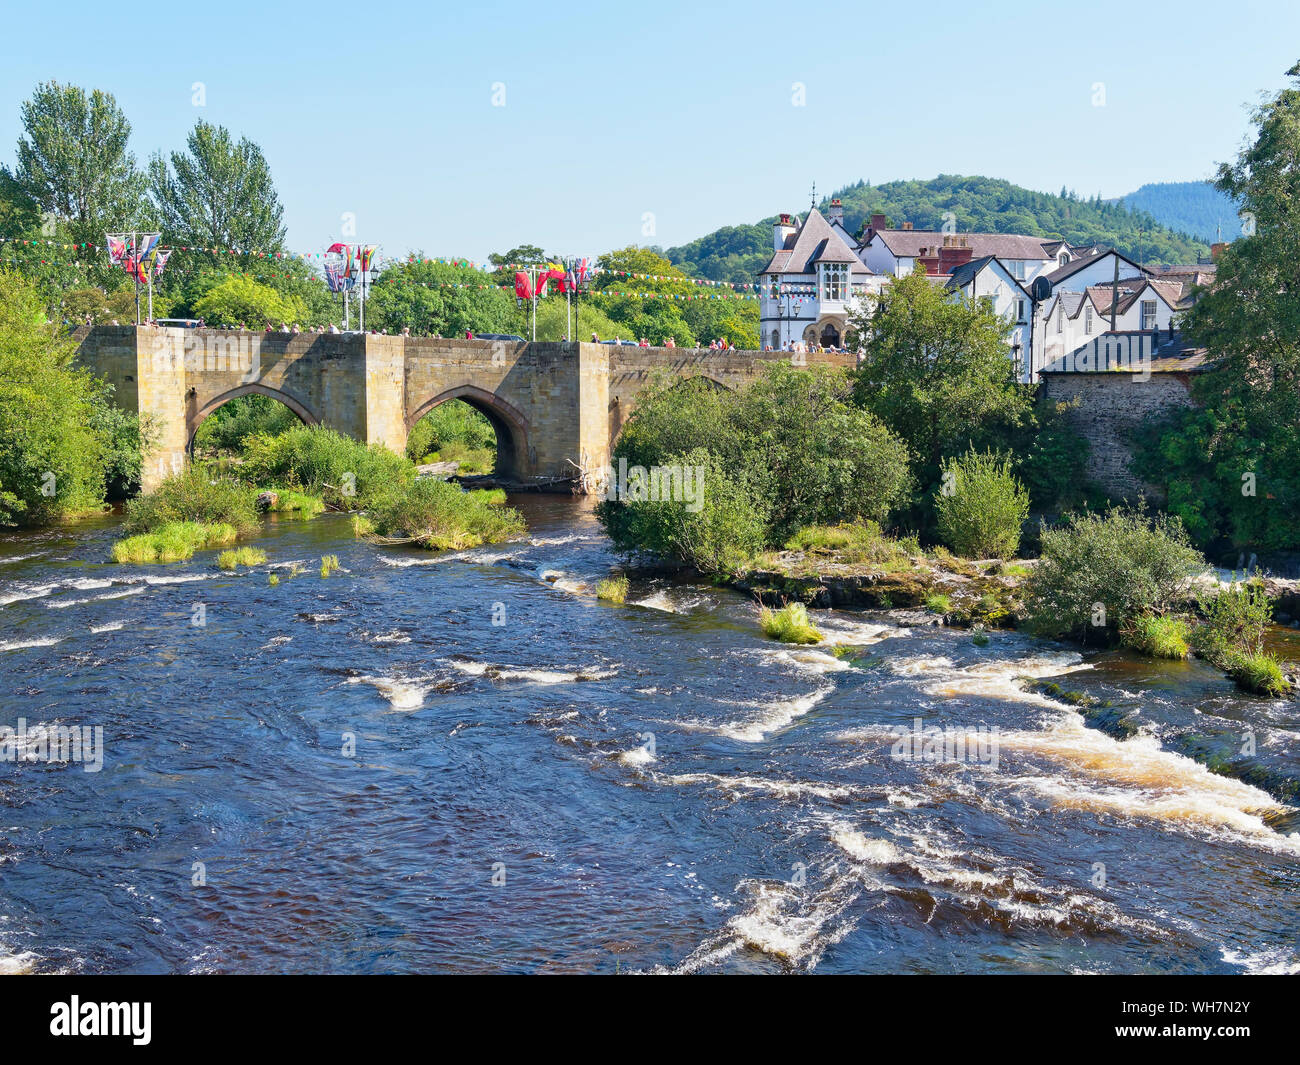 The fast flowing River Dee flows through the old stone bridge, draped in bunting and flags, in Llangollen, Wales Stock Photo